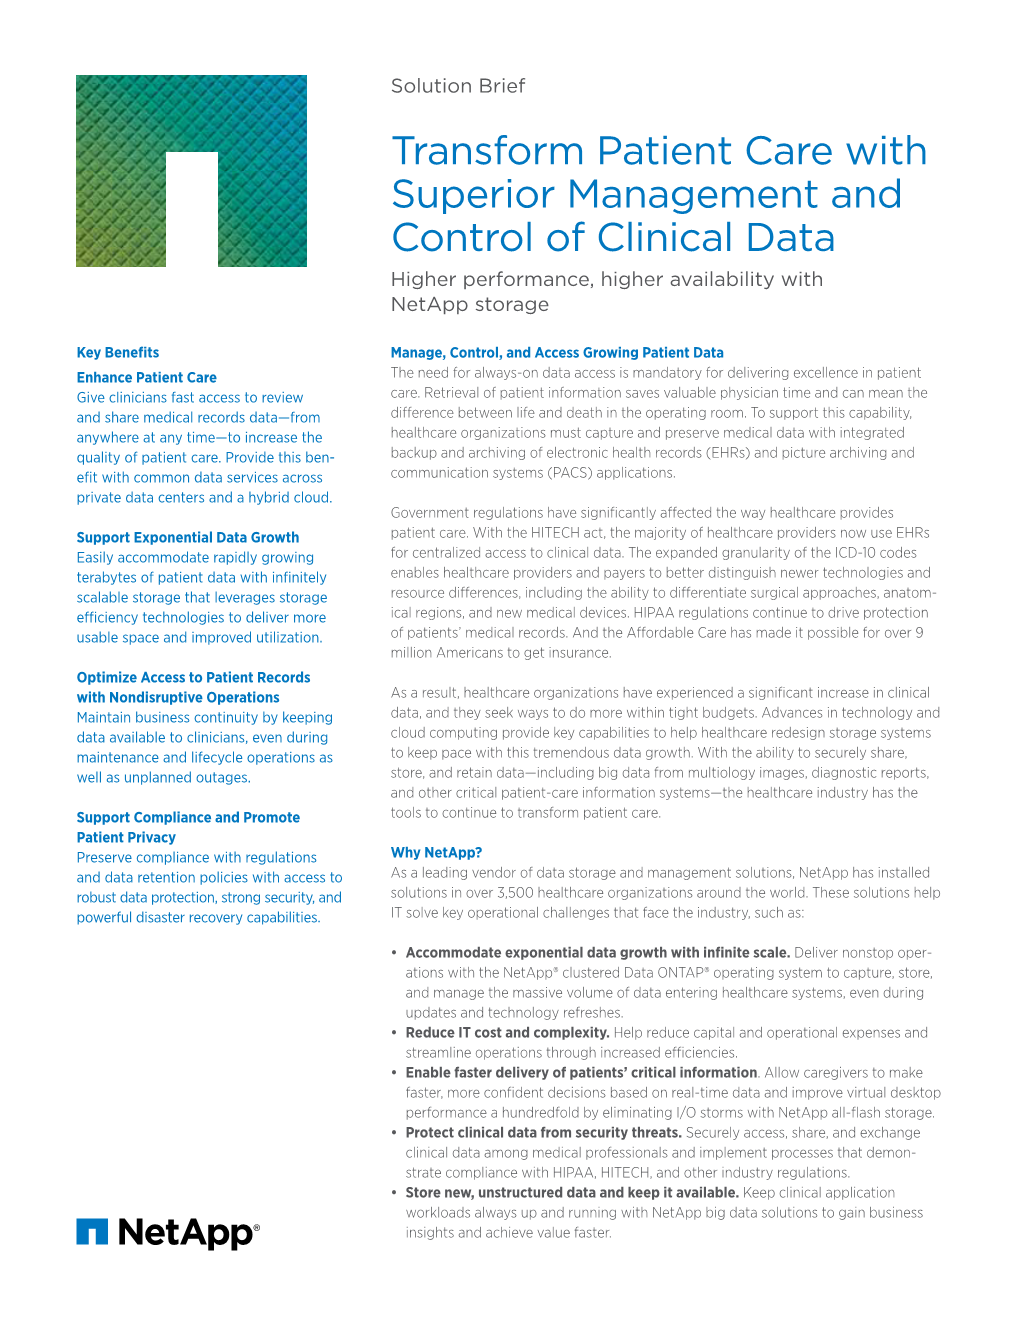 Transform Patient Care with Superior Management and Control of Clinical Data Higher Performance, Higher Availability with Netapp Storage